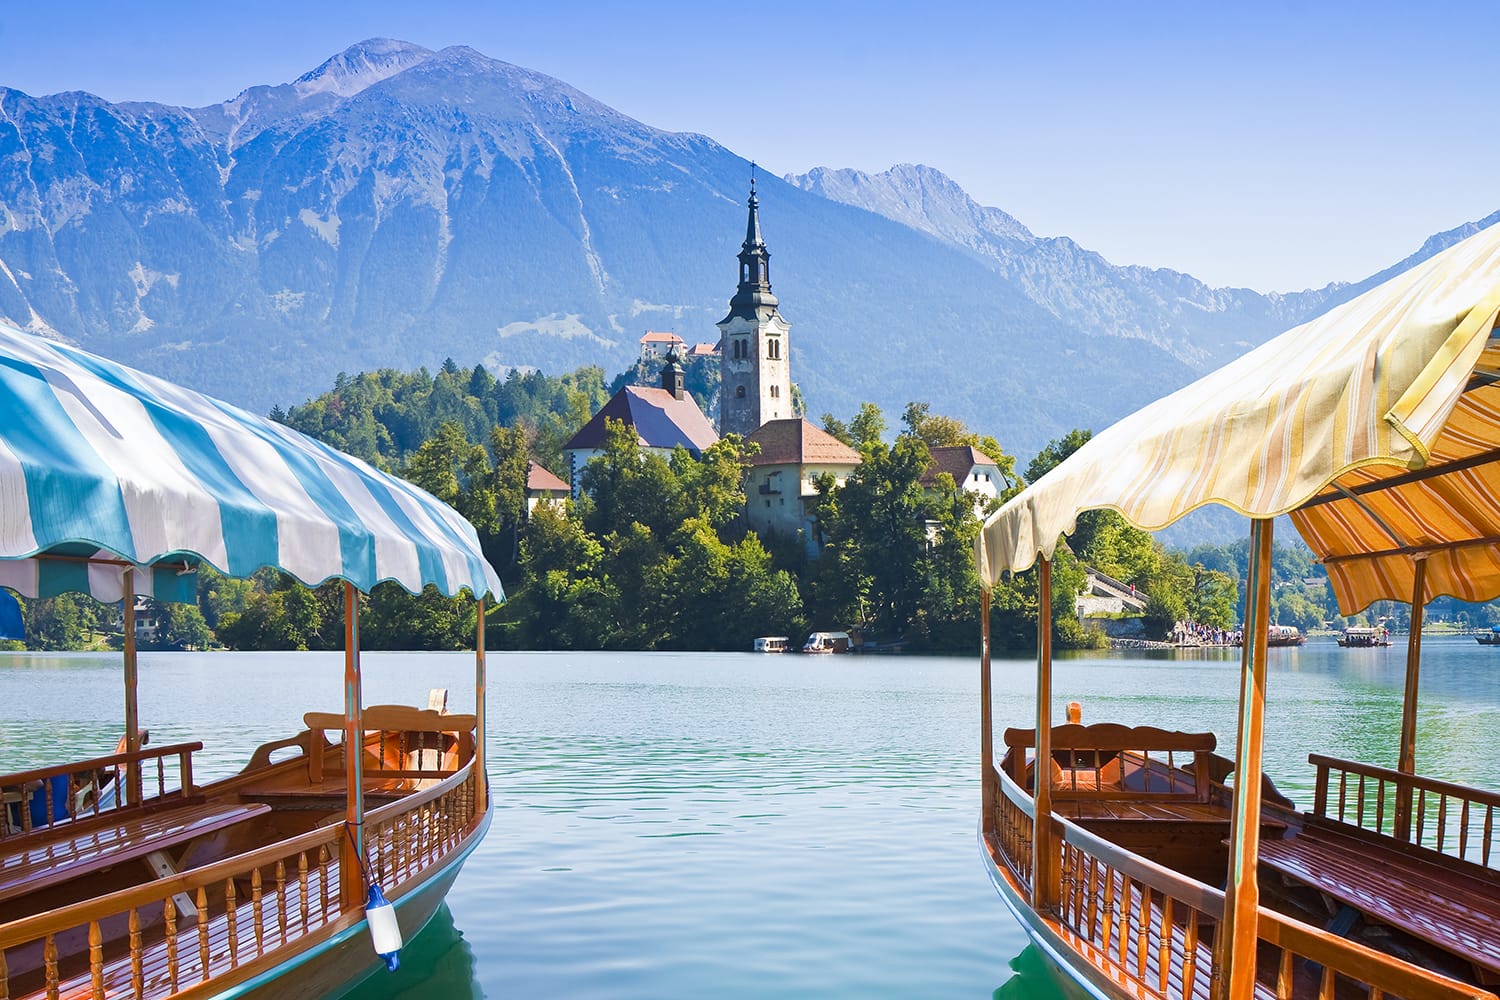 Typical wooden boats, in slovenian call "Pletna", in the Lake Bled, the most famous lake in Slovenia with the island of the church (Europe - Slovenia)